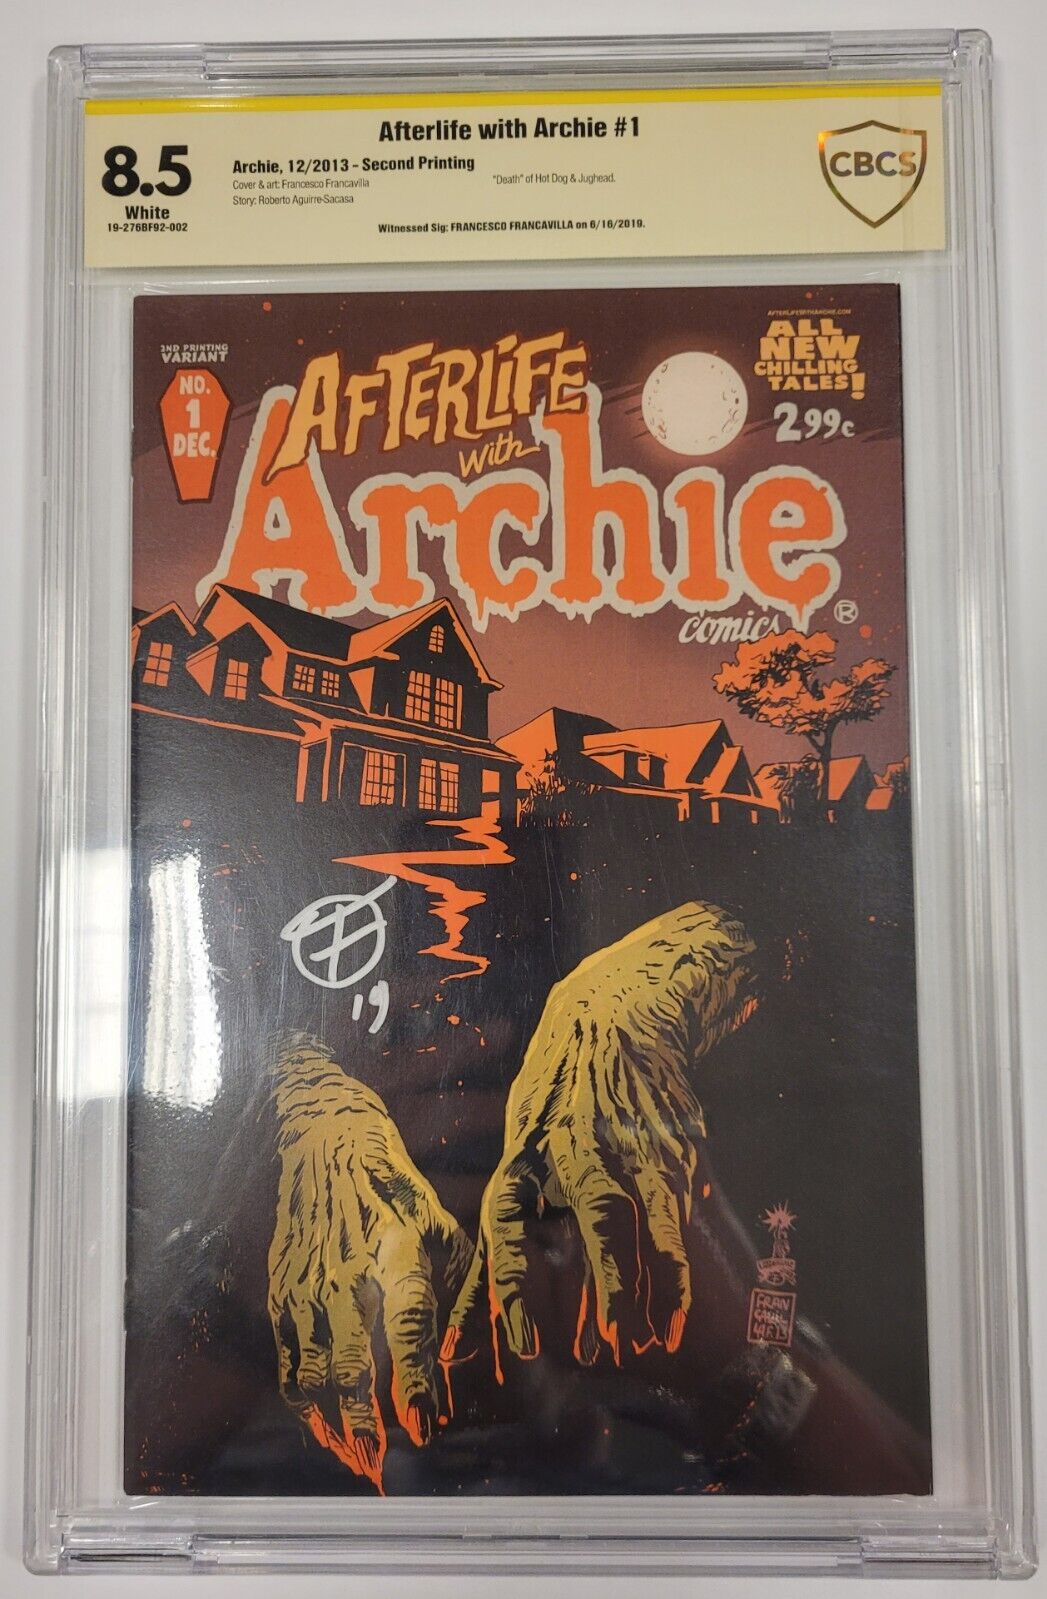 Afterlife with Archie #1 SIGNED Francesco Francavilla CBCS 8.5+ 2nd print RARE